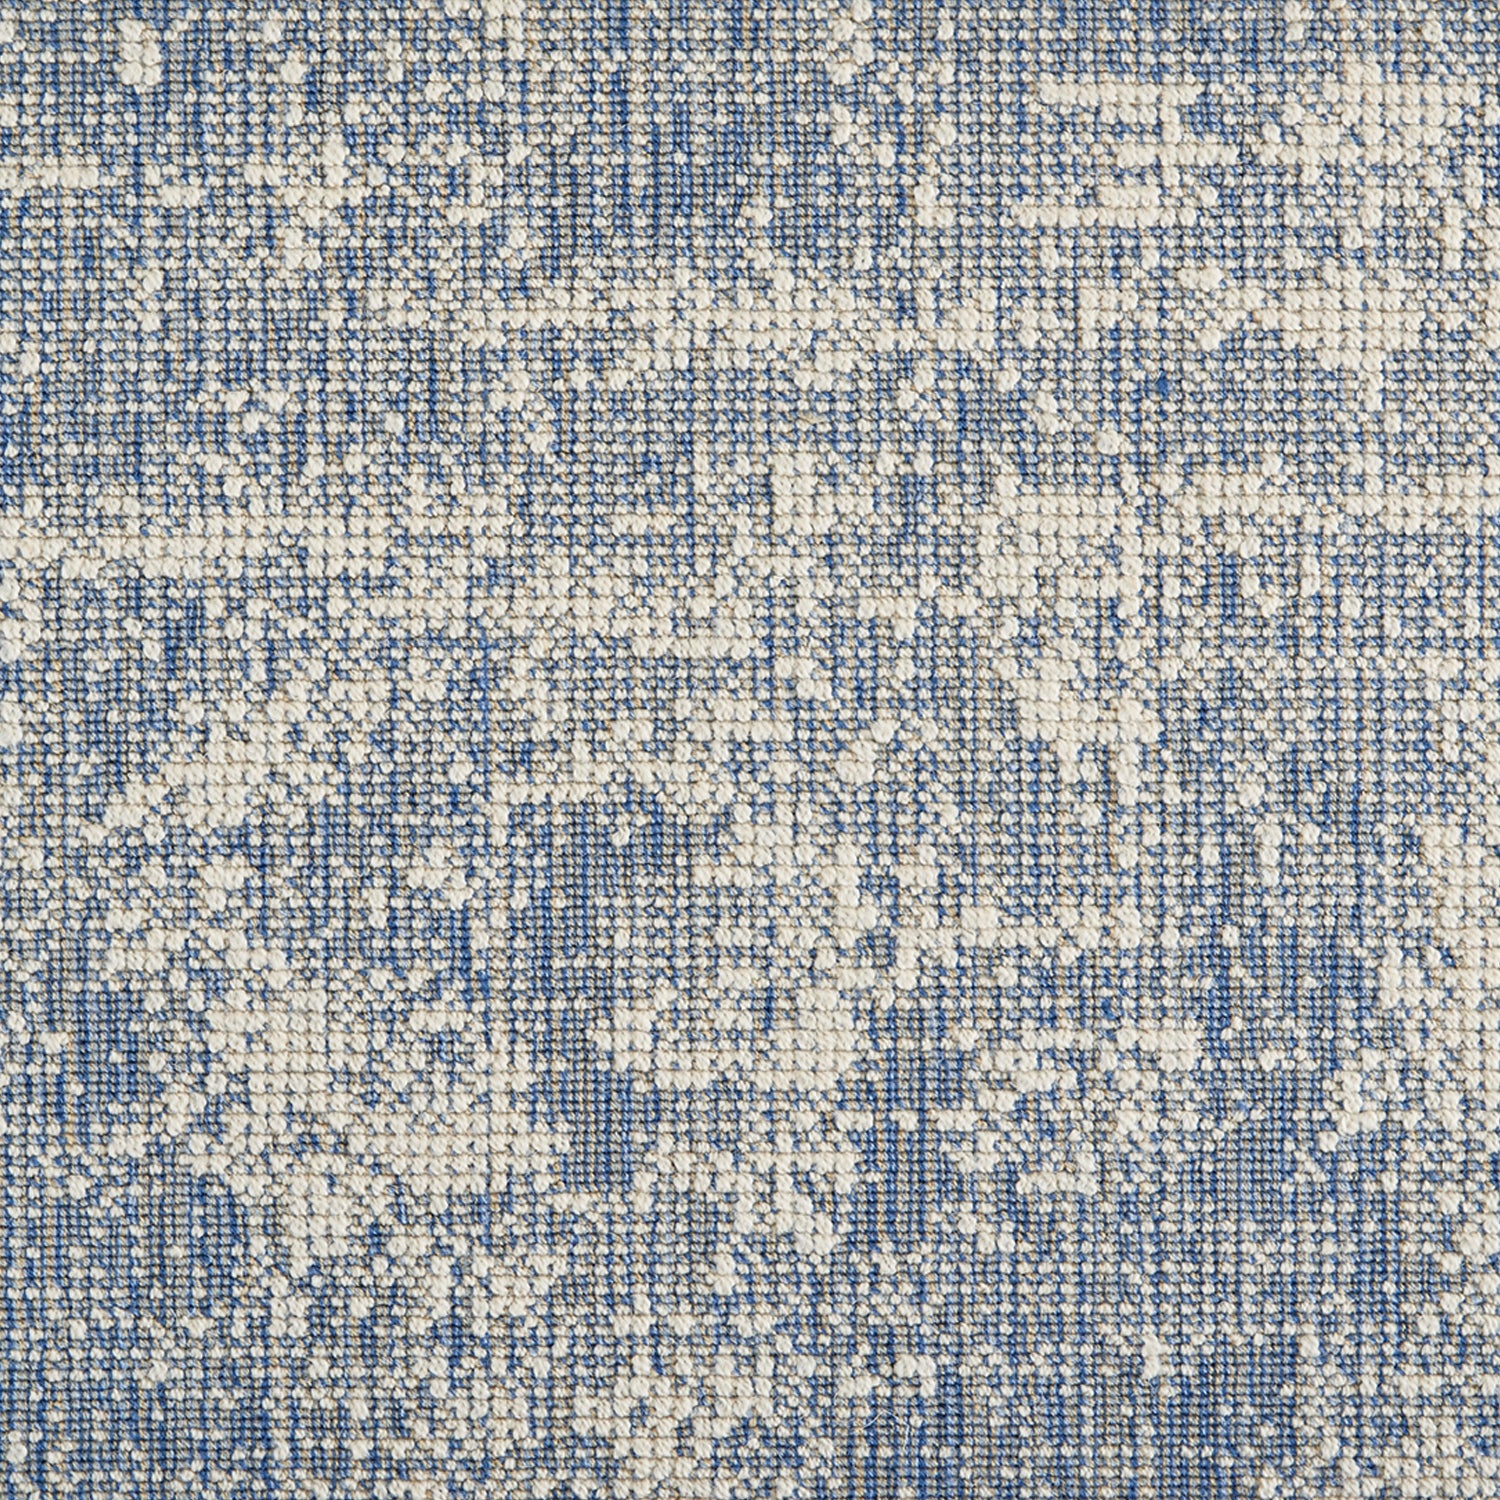 Wool-blend broadloom carpet swatch in a dimensional abstract weave in mottled blue, tan and cream.